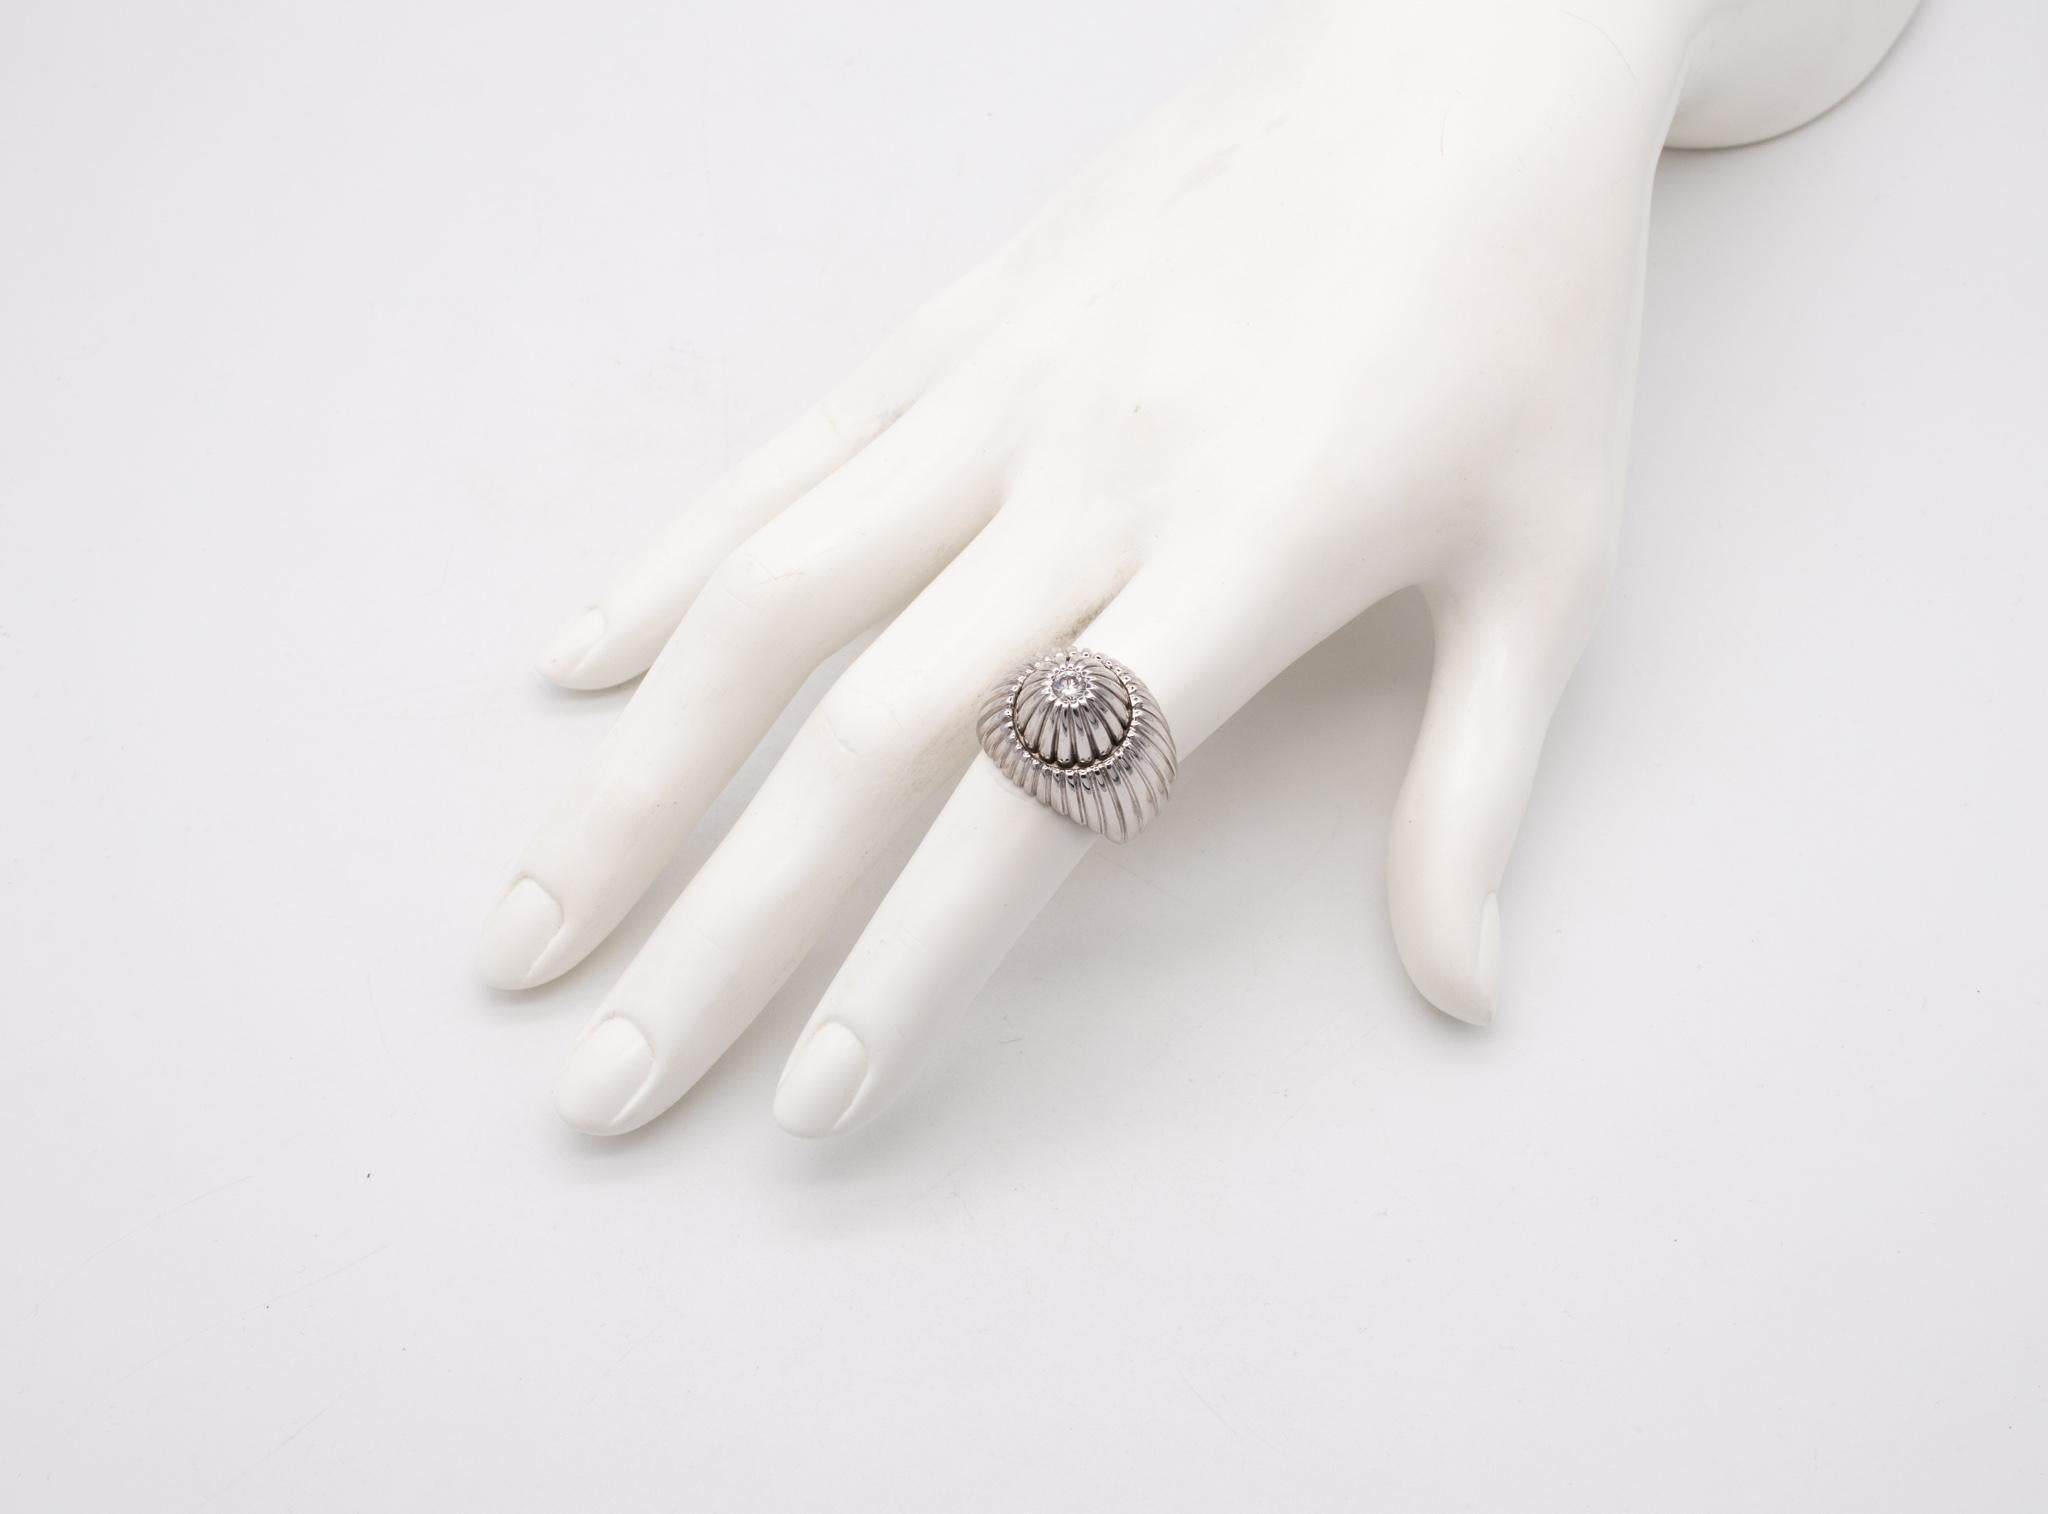 European Art Deco cocktail ring.

Very interesting vintage piece, created in Europe during the Art Deco period, circa late 1930's. This bombe cocktail ring has been crafted in solid white gold of 18 karats, with high polished finish. The design is